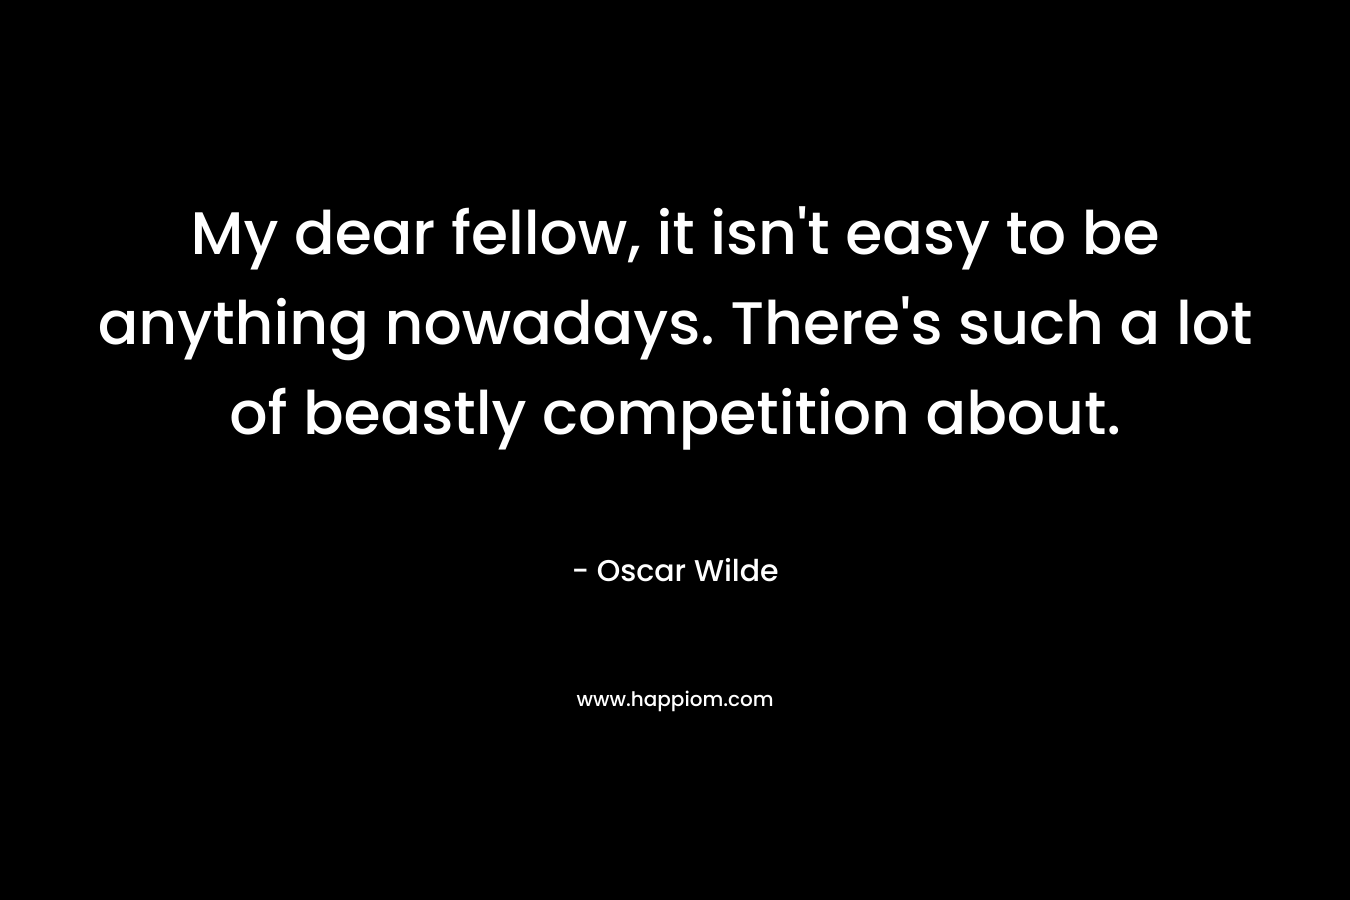 My dear fellow, it isn't easy to be anything nowadays. There's such a lot of beastly competition about.